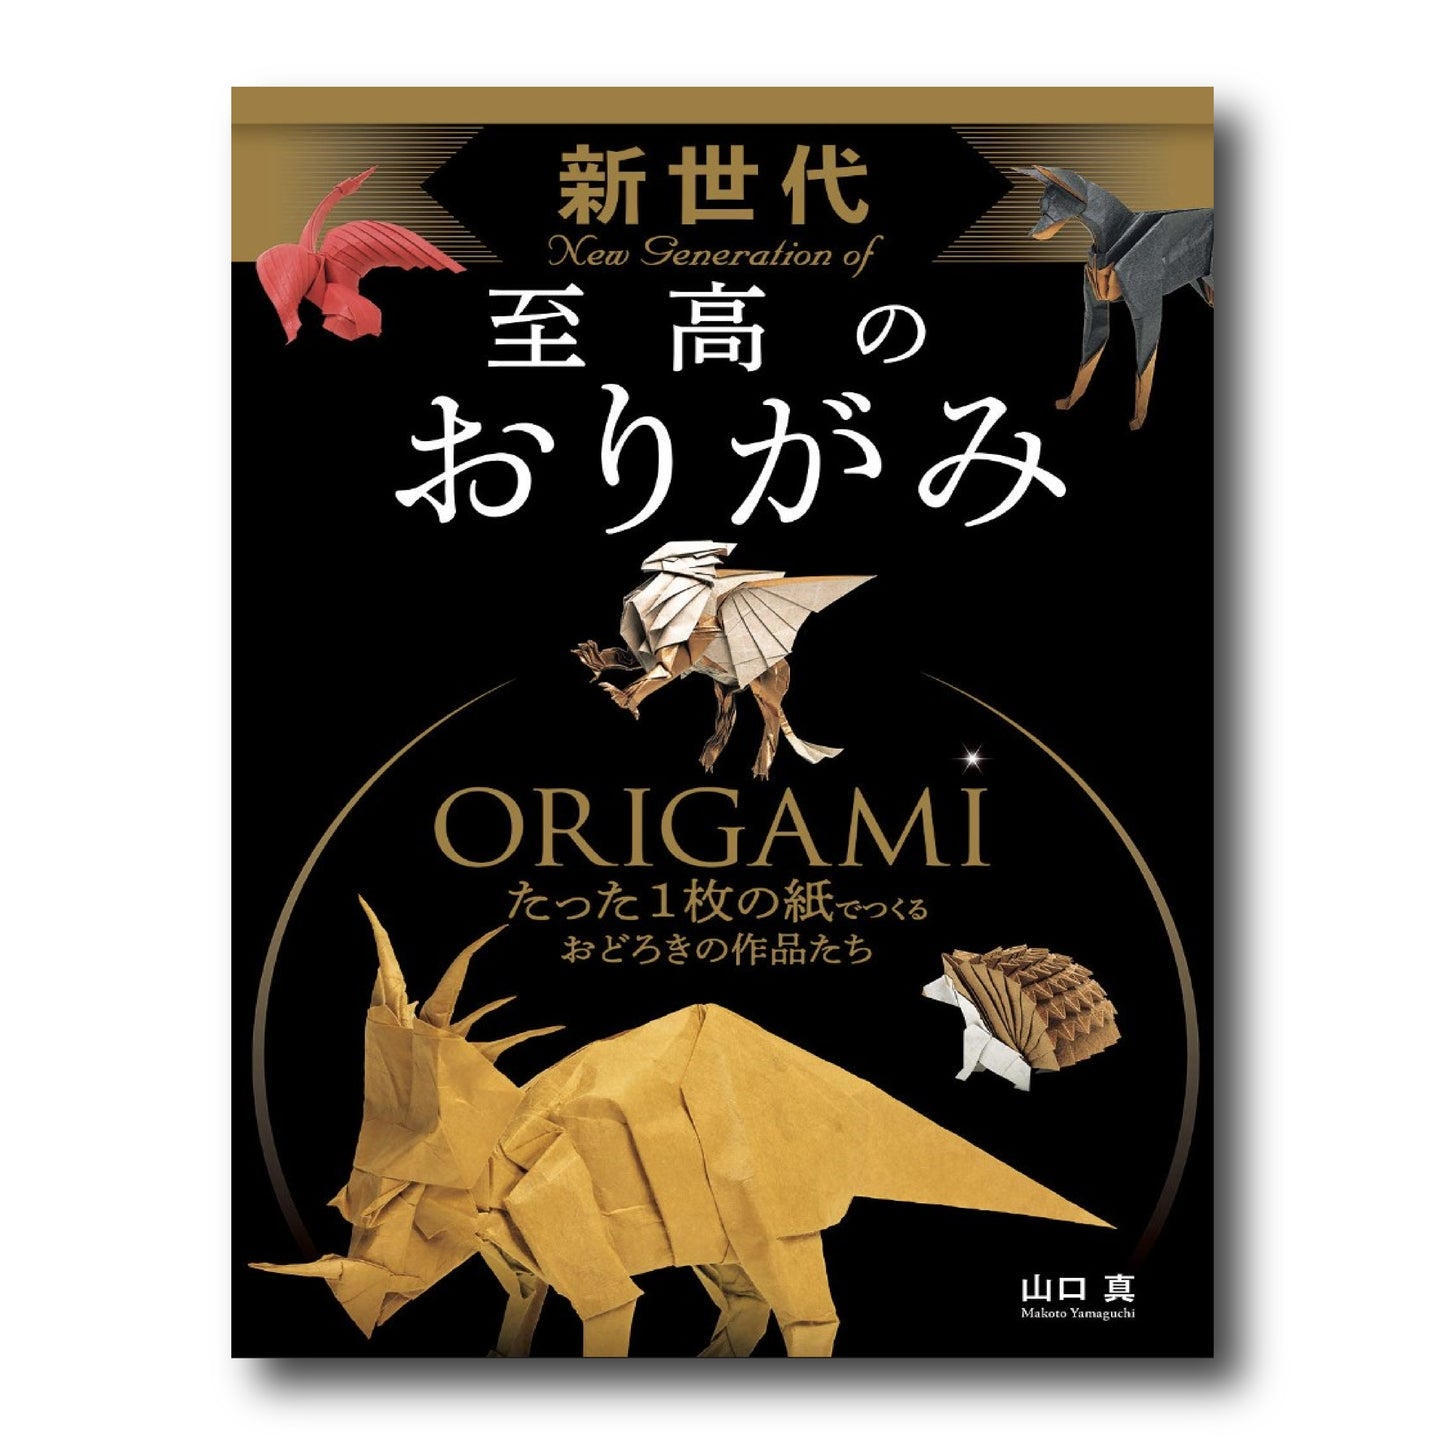 New Generation of Origami/新世代 至高のおりがみ